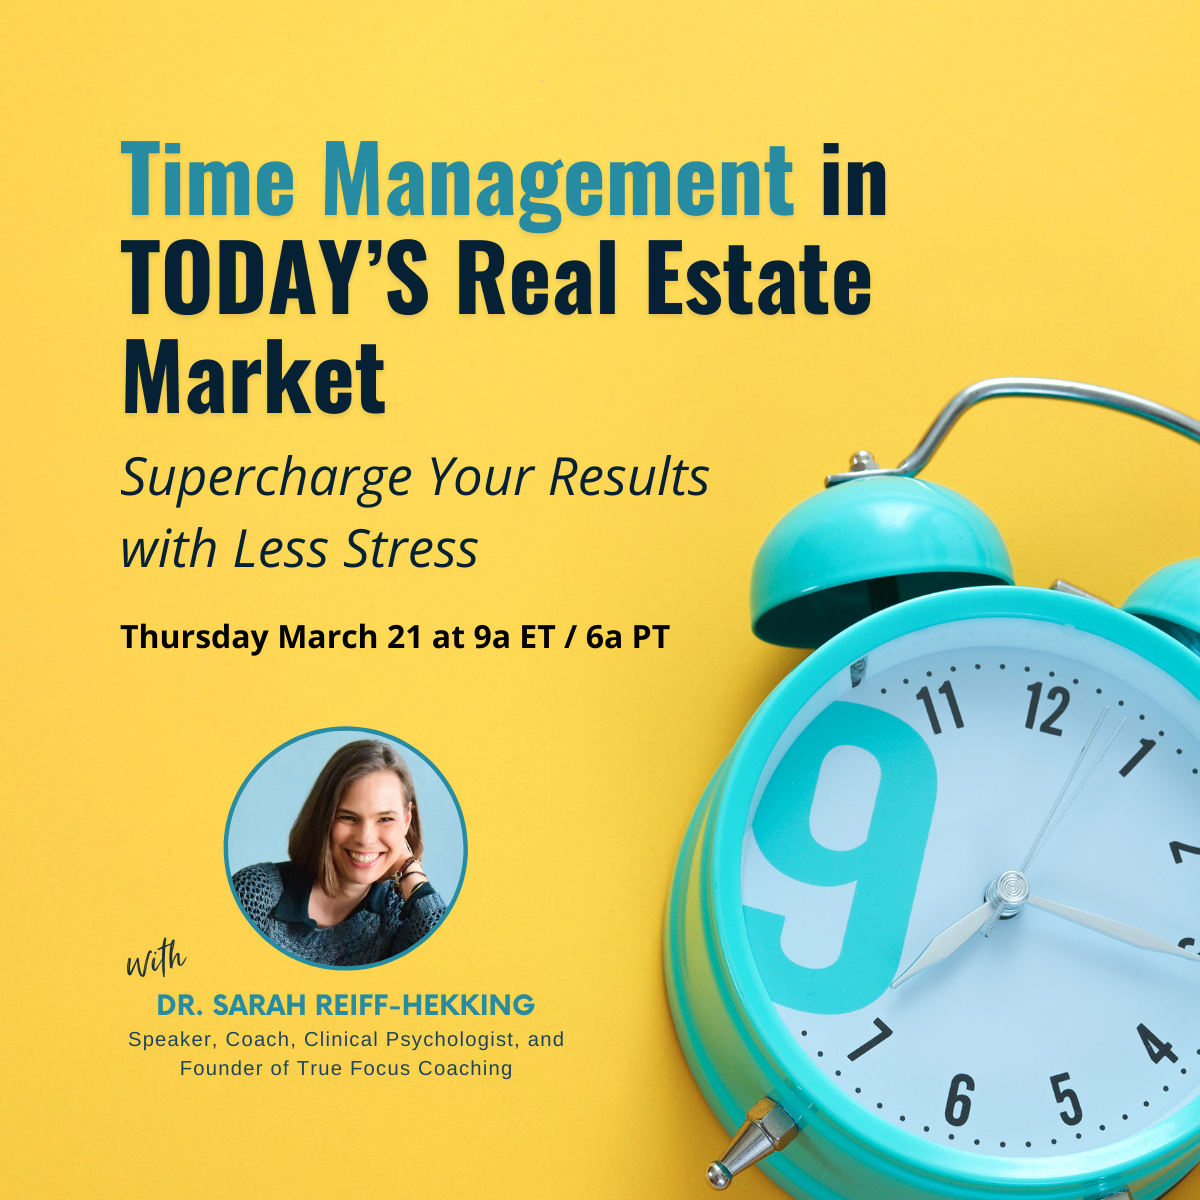 Time Management in TODAY'S Real Estate Market